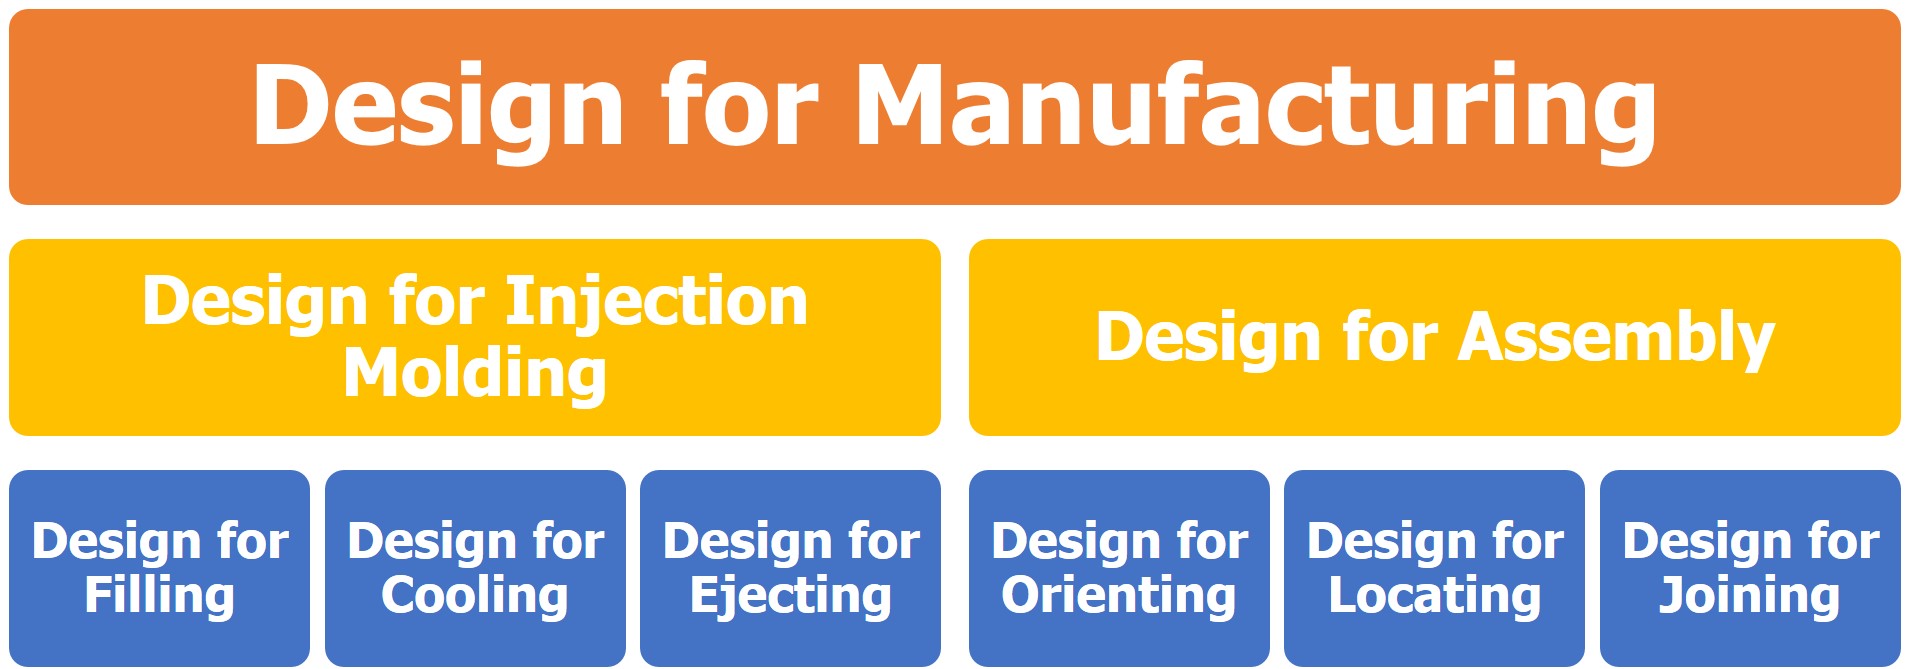 Design for Manufacturing, Taxonomy